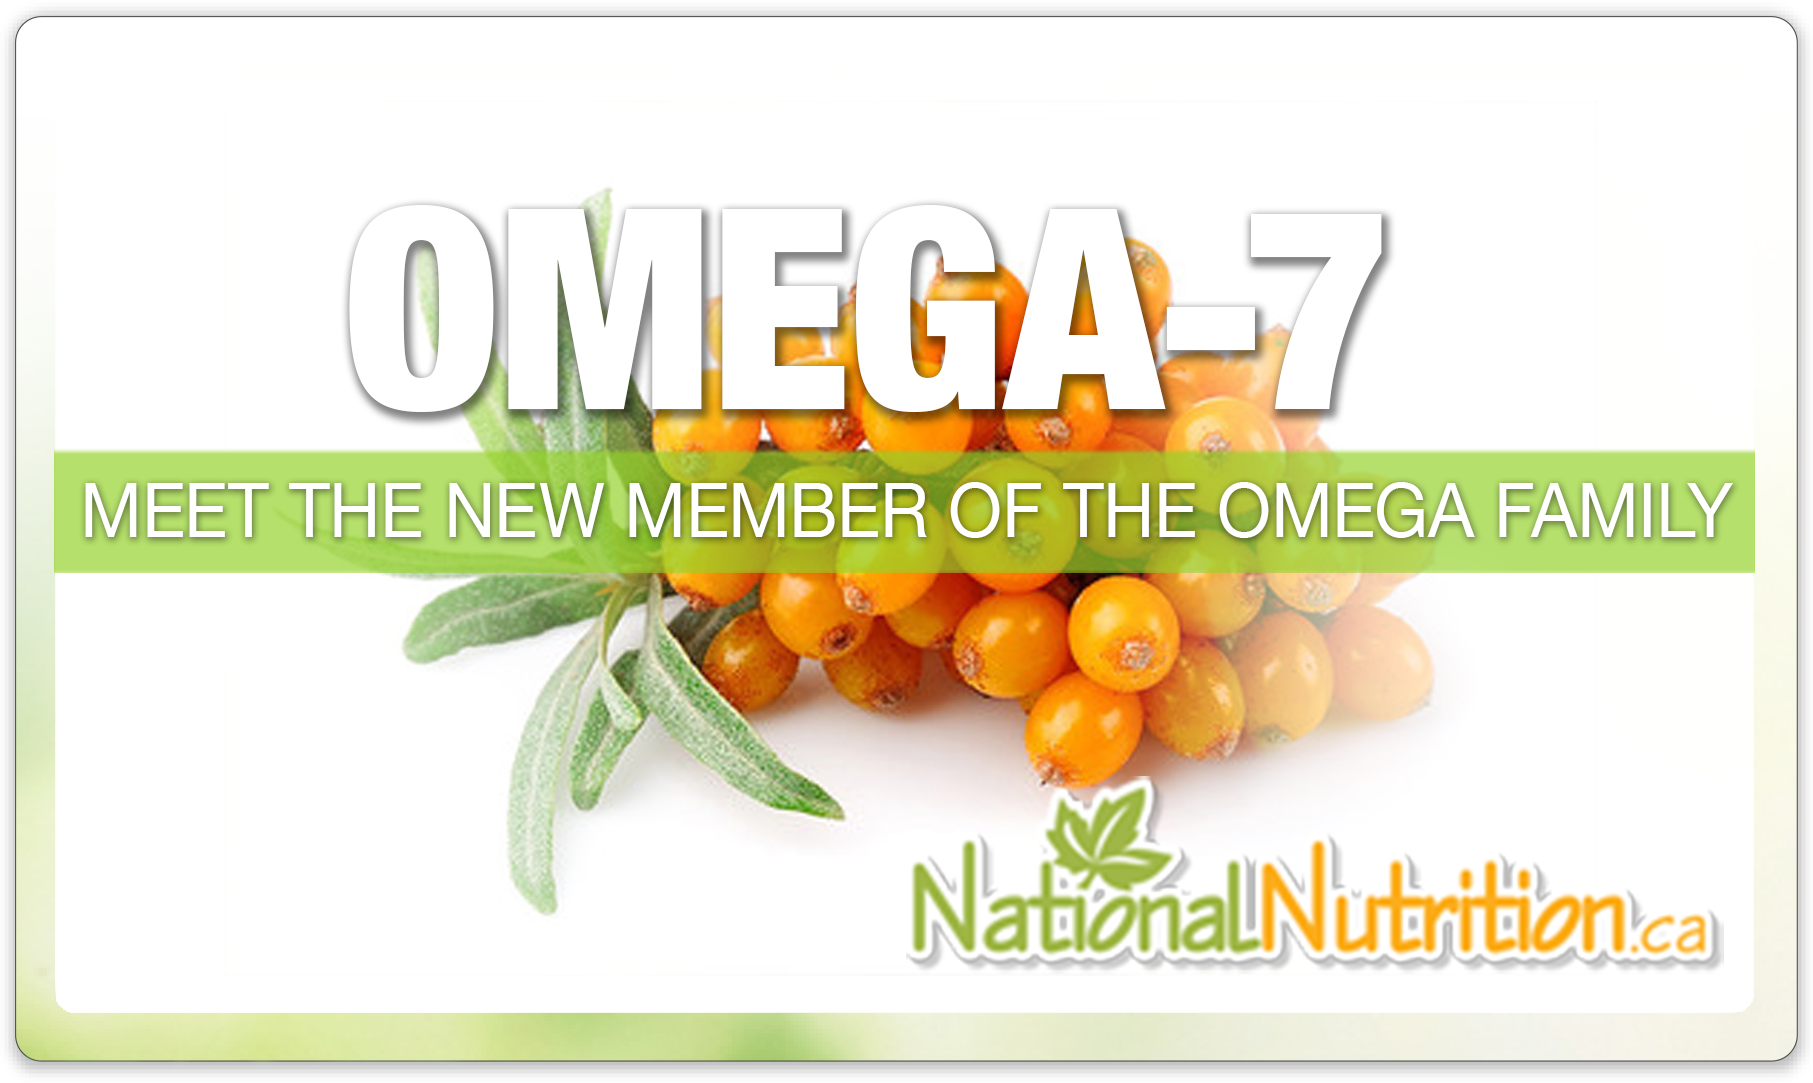 Omega 7  - National Nutrition Articles